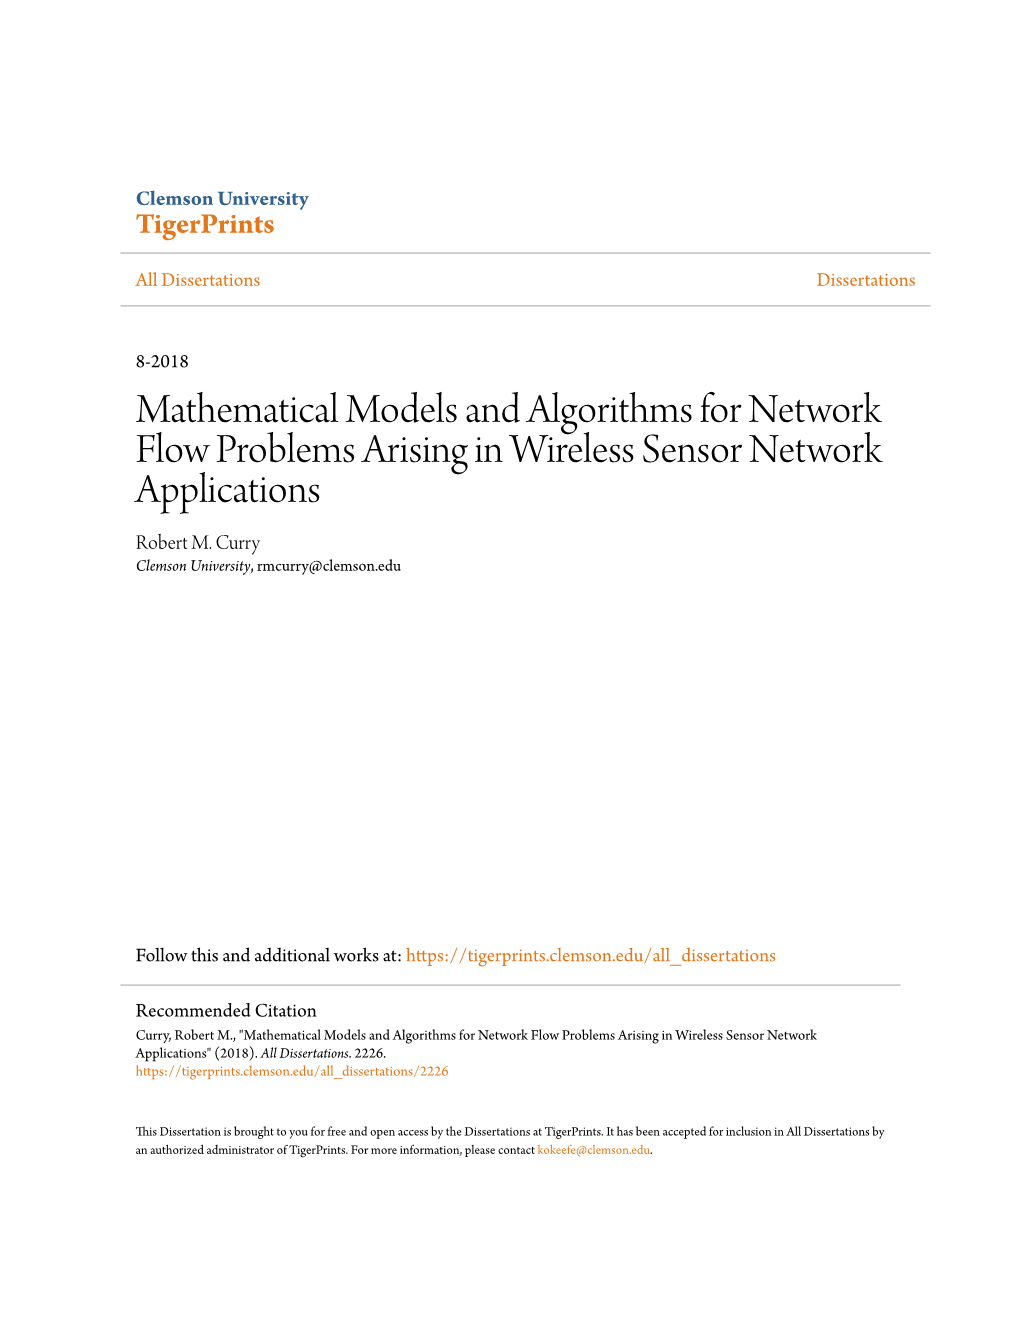 Mathematical Models and Algorithms for Network Flow Problems Arising in Wireless Sensor Network Applications Robert M